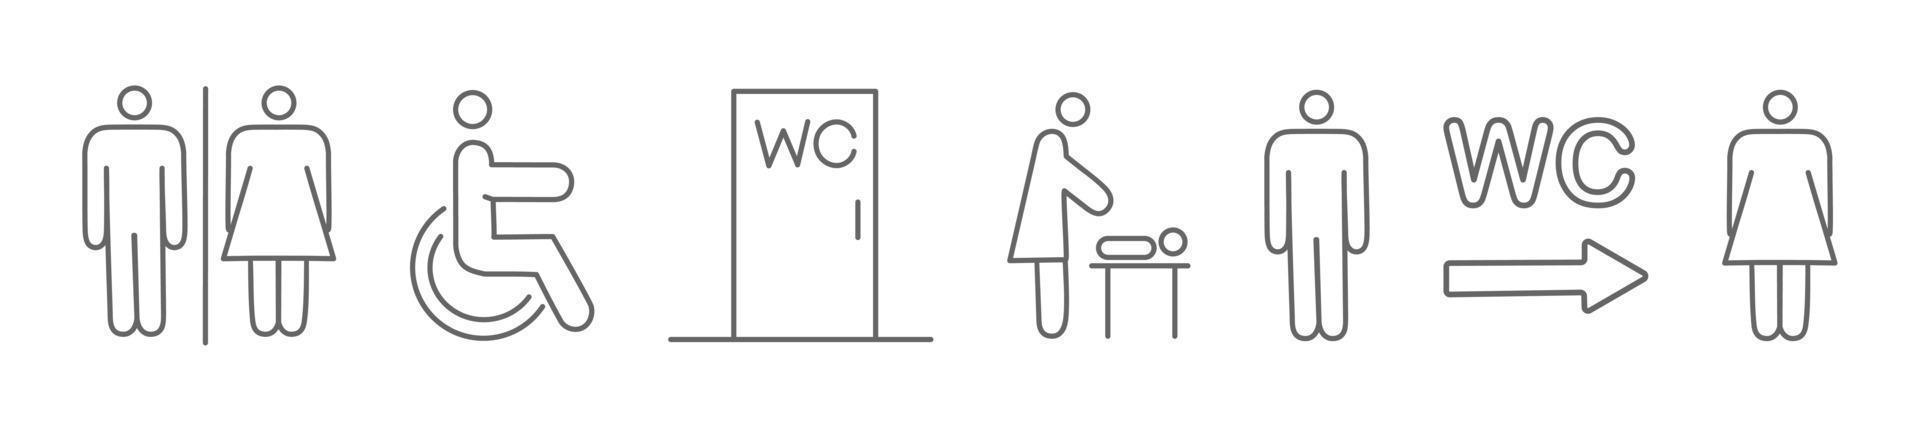 A set of toilet navigation icons. Wayfinding wc female male for disabled and mother and child room. Vector illustration